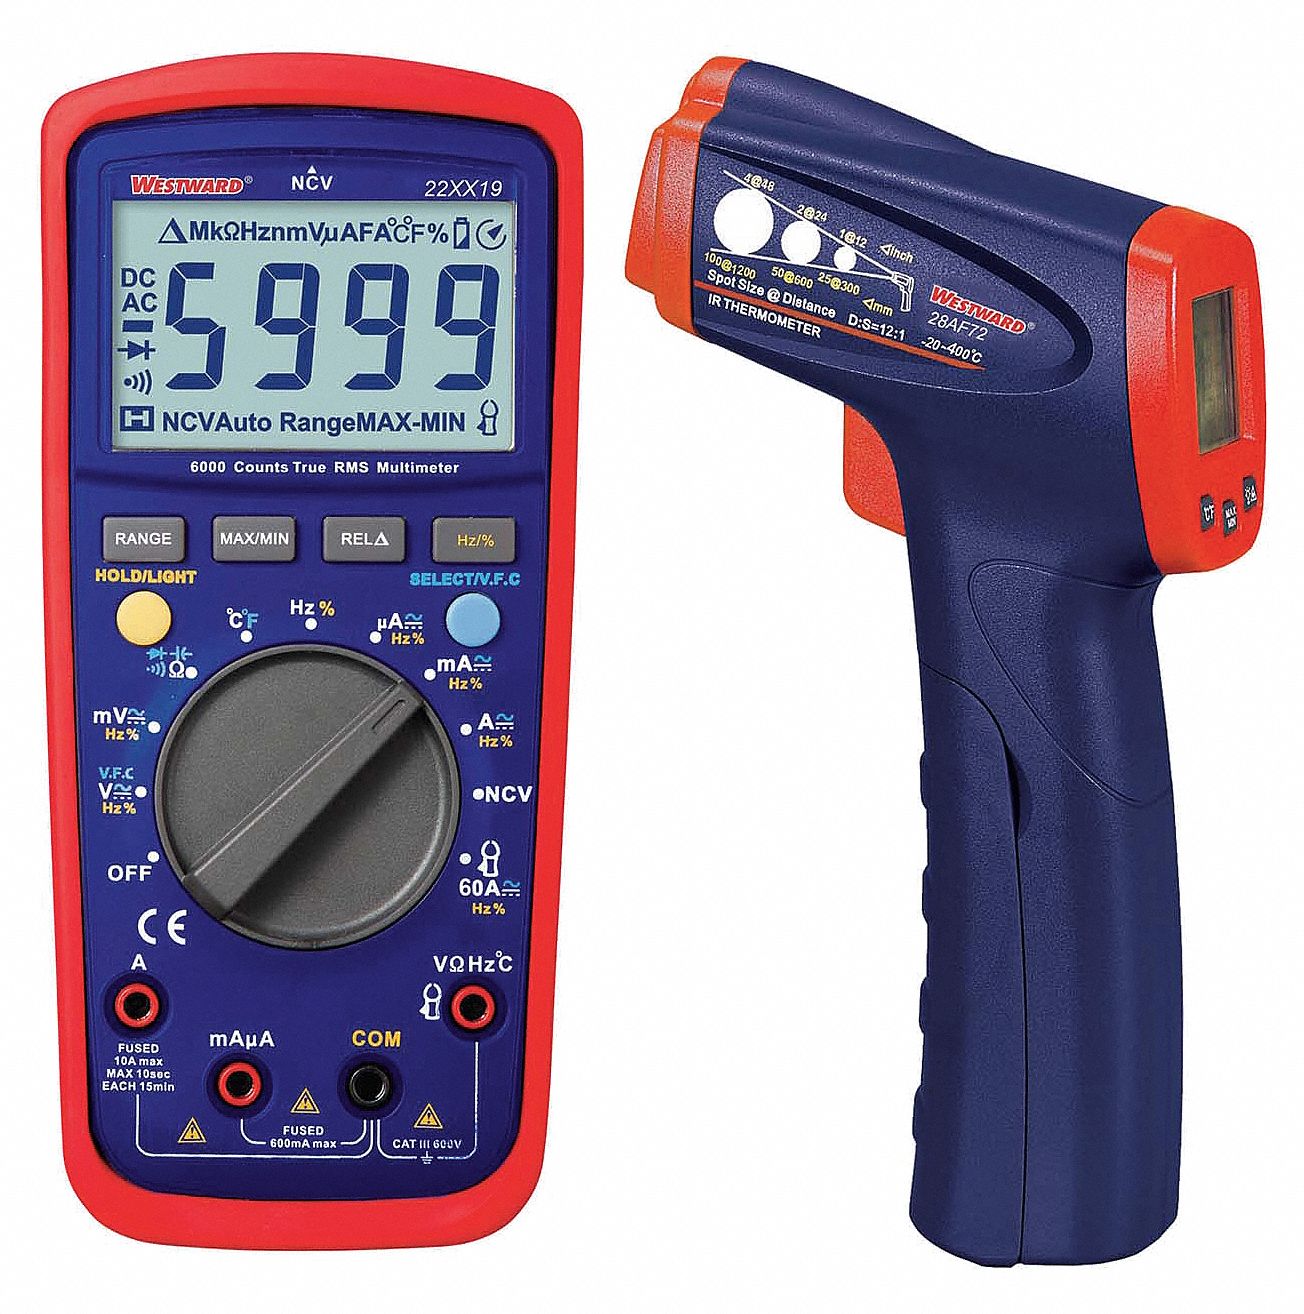 22XX27 - Digital Multimeter and IR Thermometer